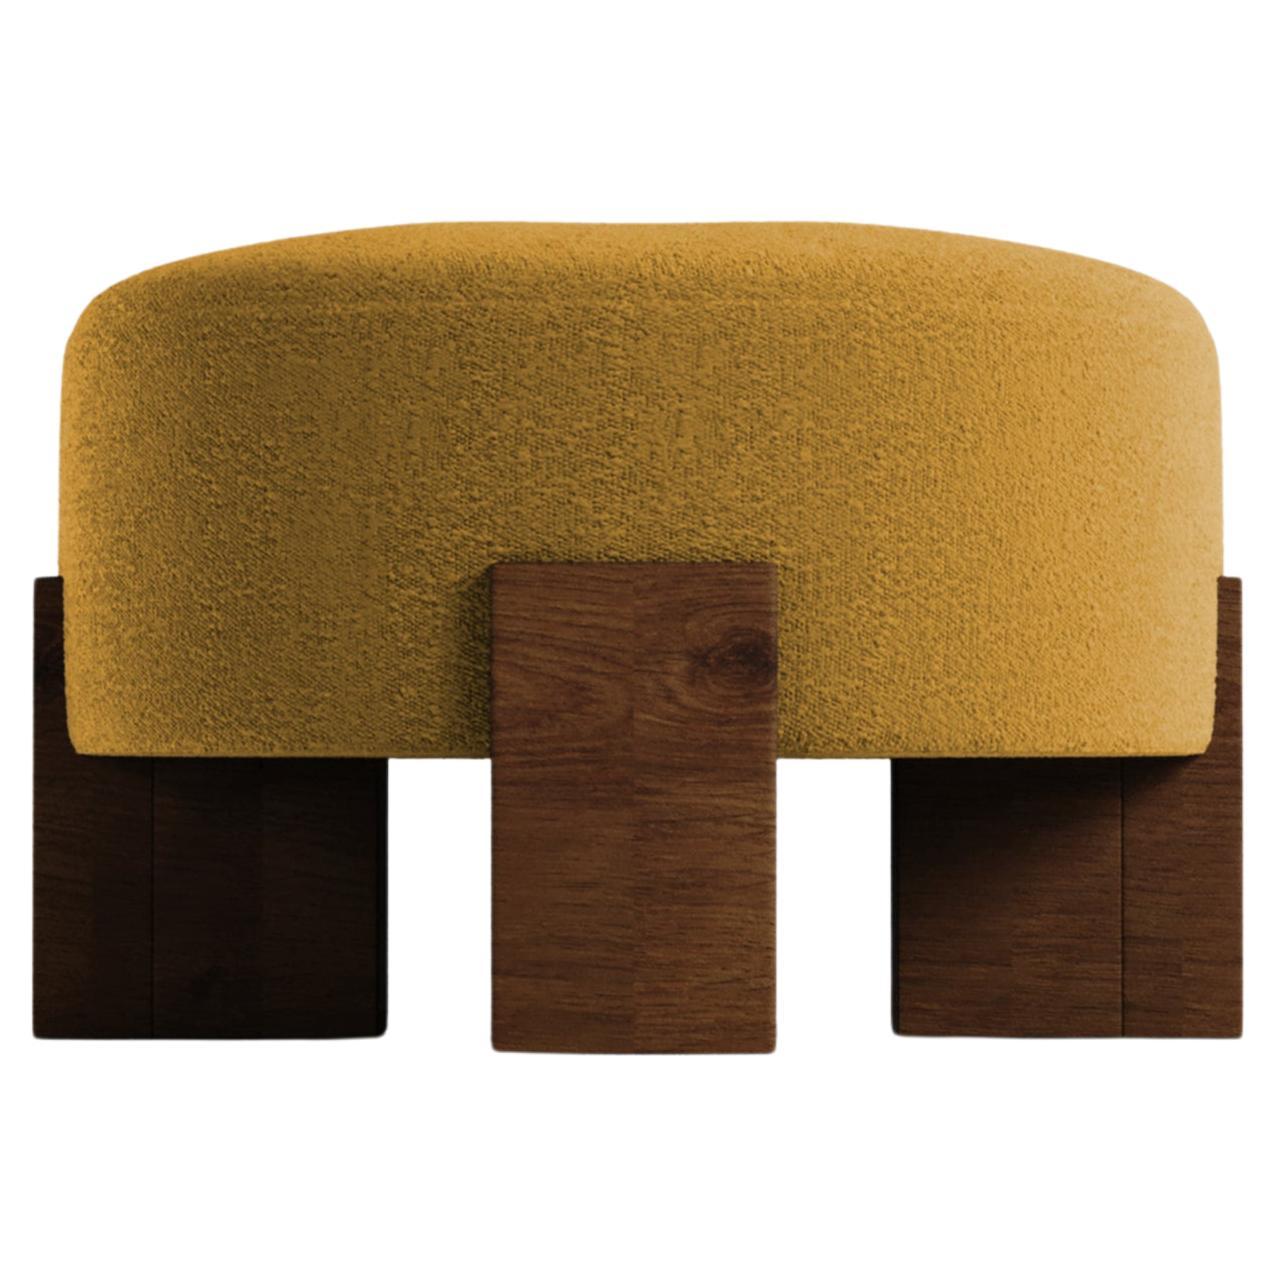 Collector Contemporary Cassete Puff in Boucle Mustard by Alter Ego Studio